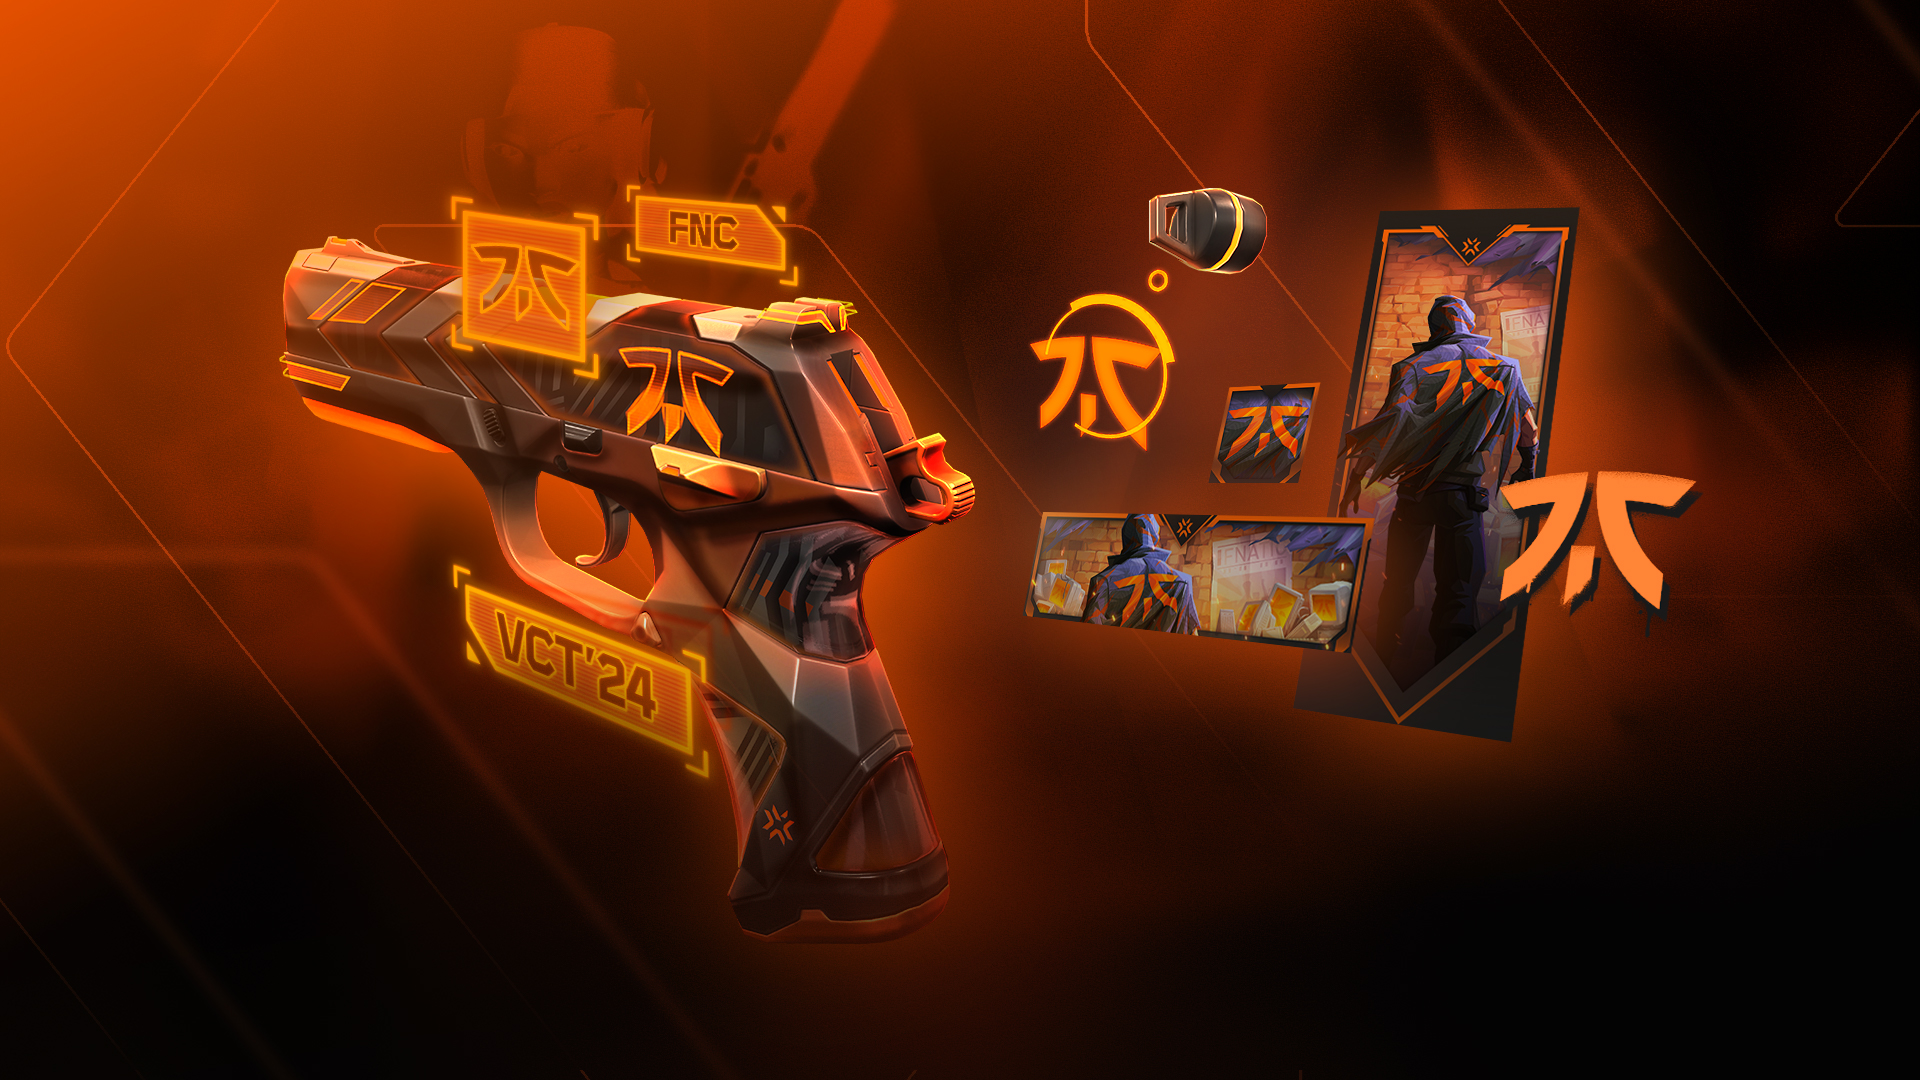 FNATIC VCT Team Capsule. (Image Credits: Riot Games)